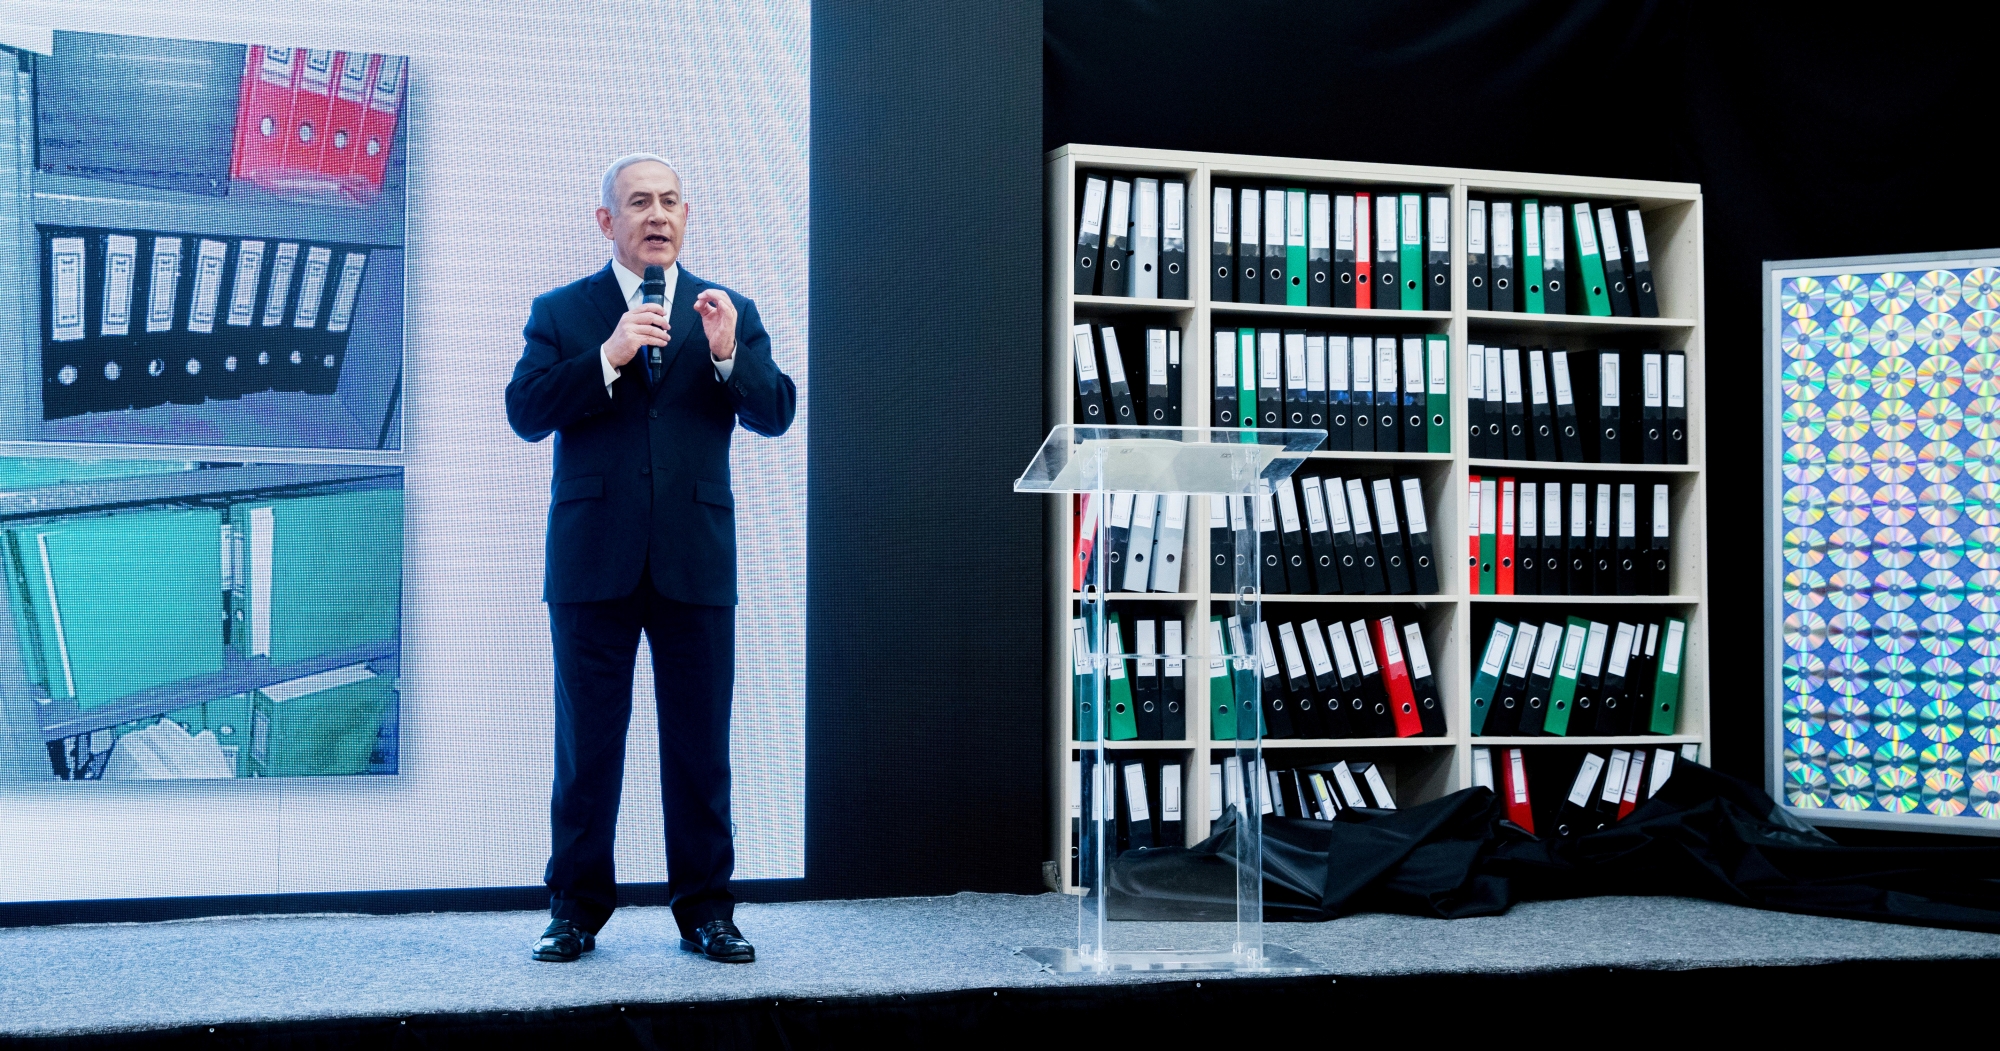 epa06702941 Israeli Prime Minister Benjamin Netanyahu as he describes how Iran has continued with its nuclear capabilities with the purpose of making atomic weapons, in the Israeli Defense Ministry in Tel Aviv, Israel, 30 April 2018. At right are the alleged files and CD-Roms with thousands of pages of intelligence Israel obtained.  EPA/JIM HOLLANDER ISRAEL IRAN NUCLEAR CAPABILITIES